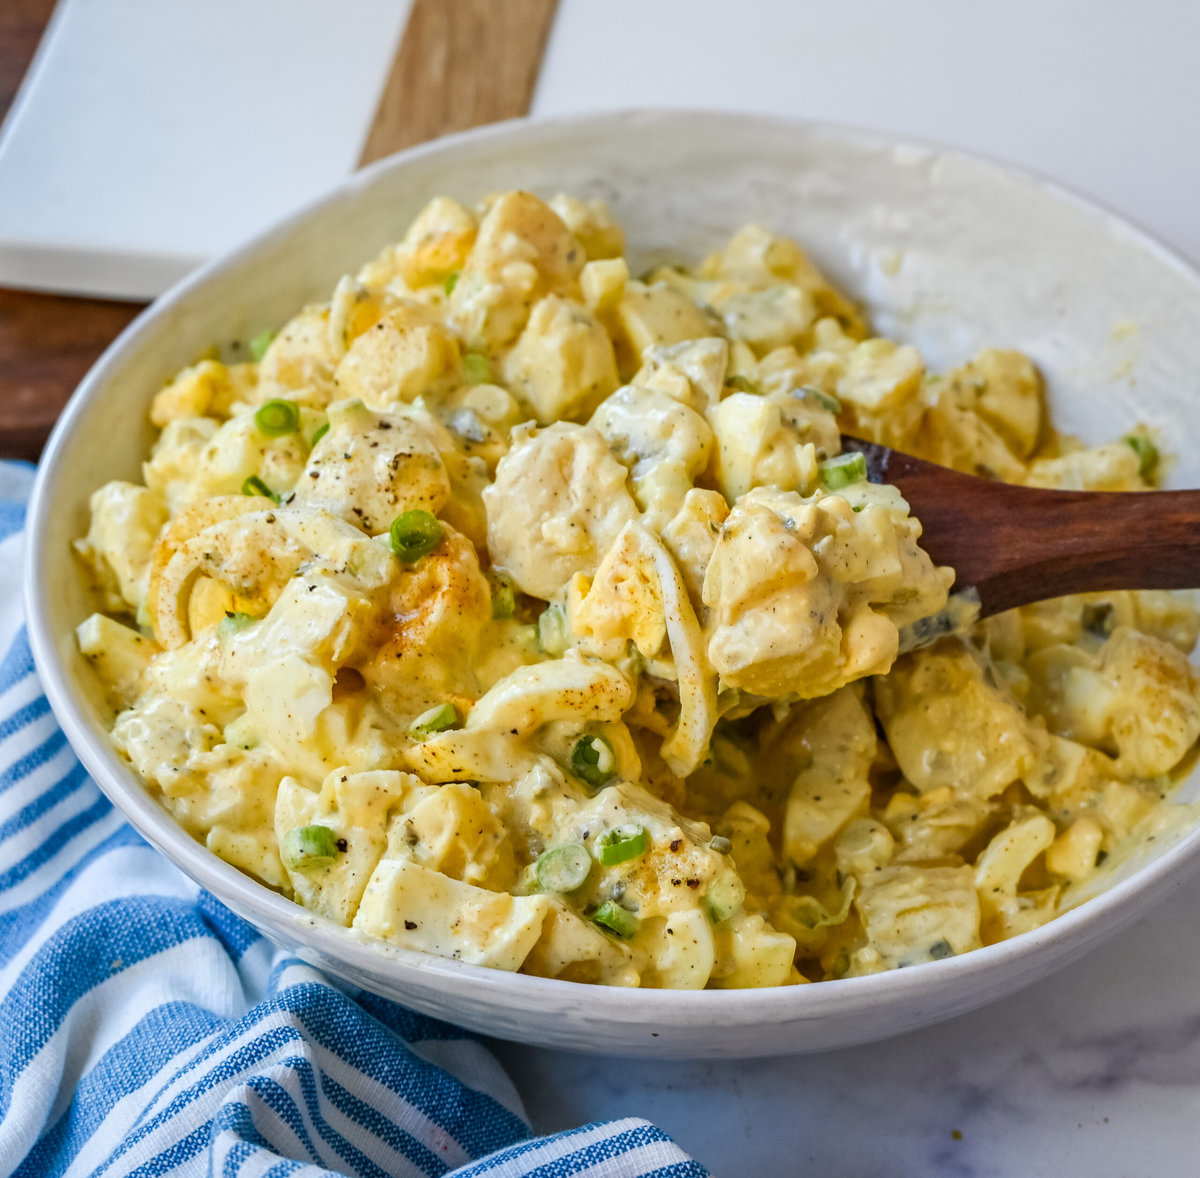 Best Potato Salad Recipe. This Mama's Potato Salad is a classic potato salad recipe made with potatoes, hard boiled eggs, sweet pickles, mayonnaise, mustard, spices, and a touch of green onion. This is the best potato recipe you will ever eat!